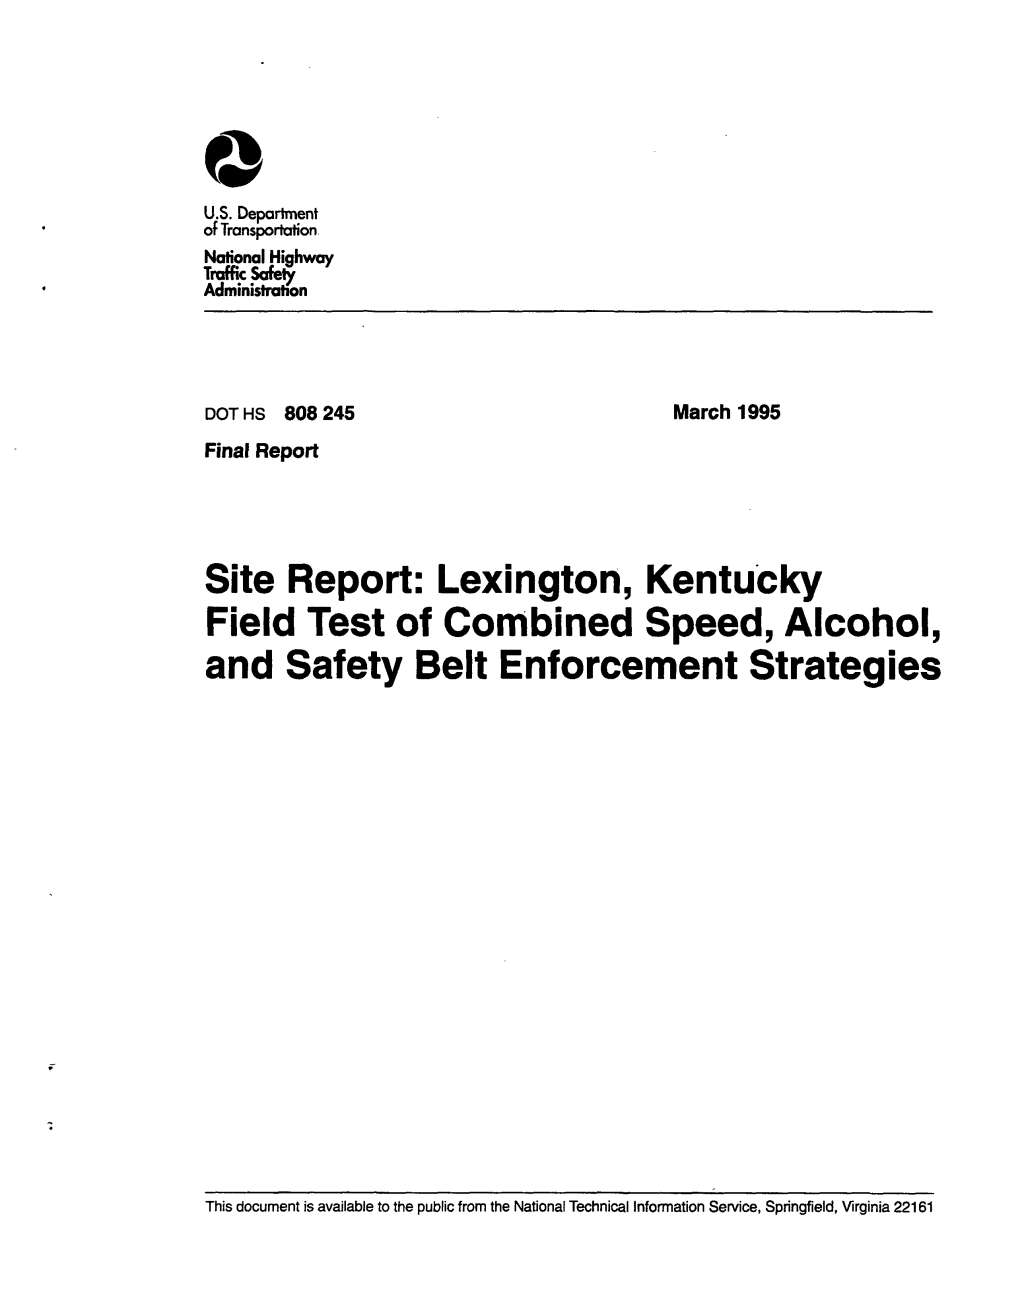 Lexington, Kentucky Field Test of Combined Speed, Alcohol, and Safety Belt Enforcement Strategies